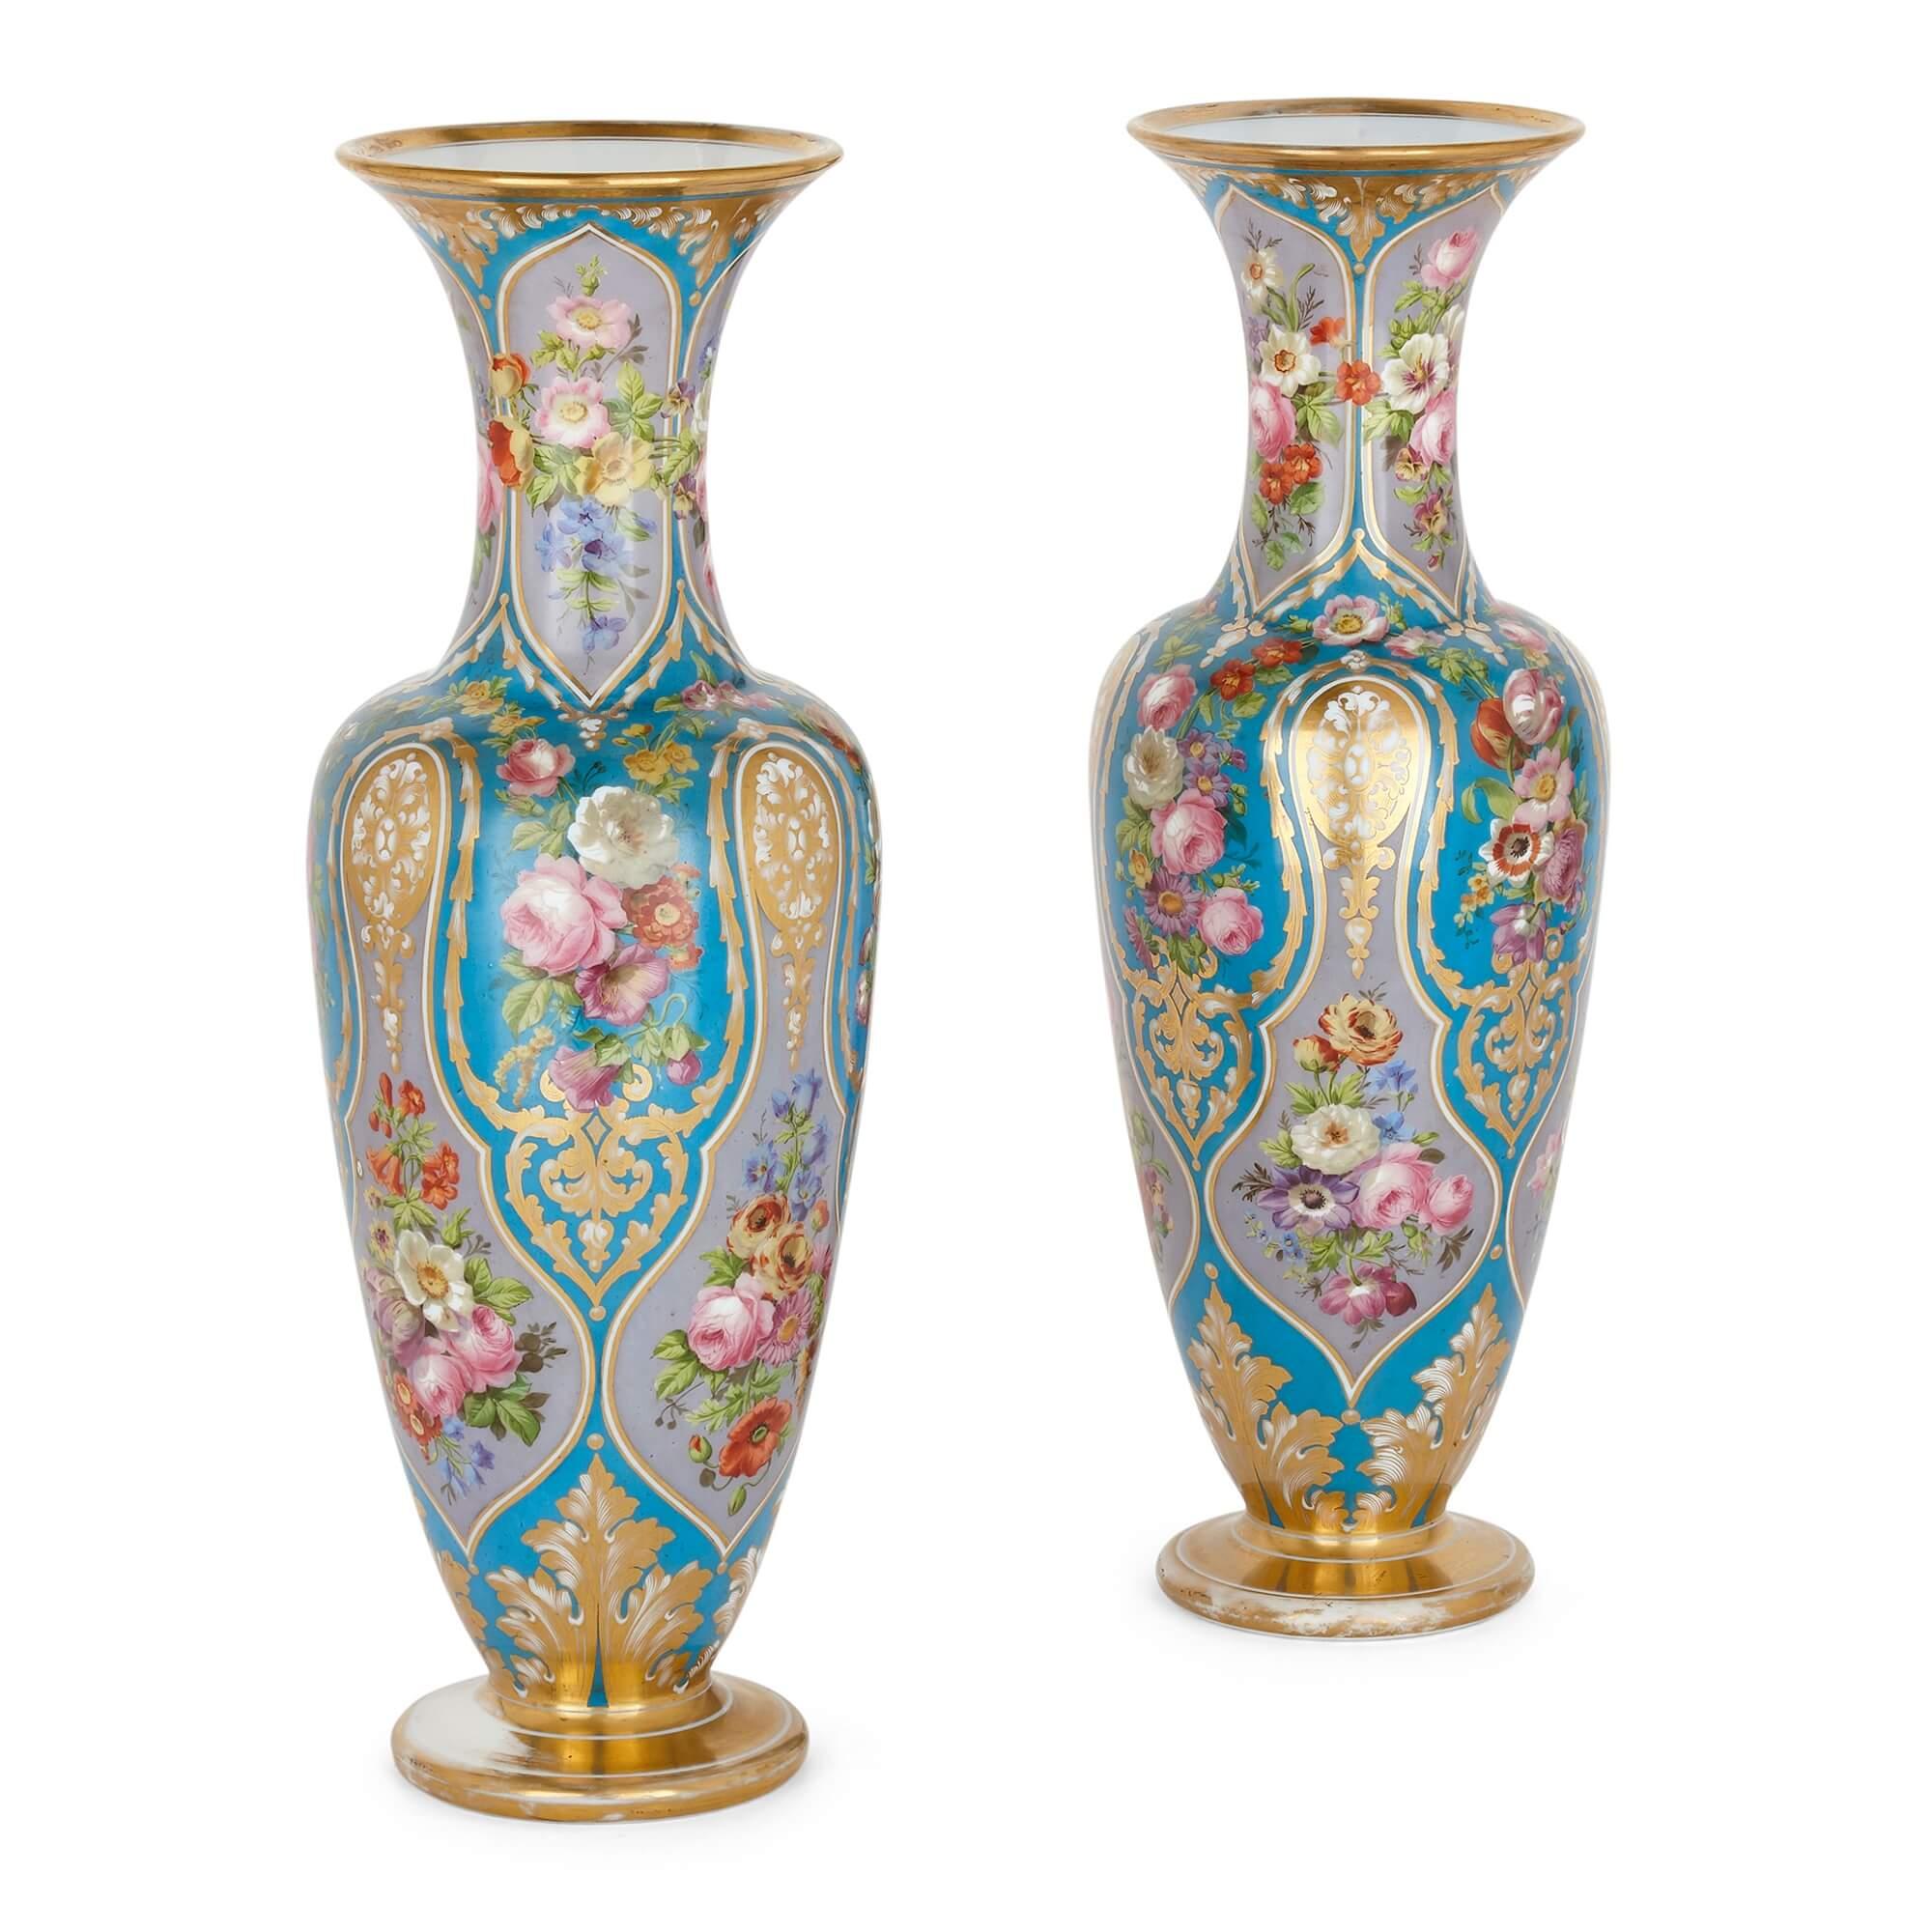 Pair of Antique French Floral Glass Vases by Baccarat In Good Condition For Sale In London, GB